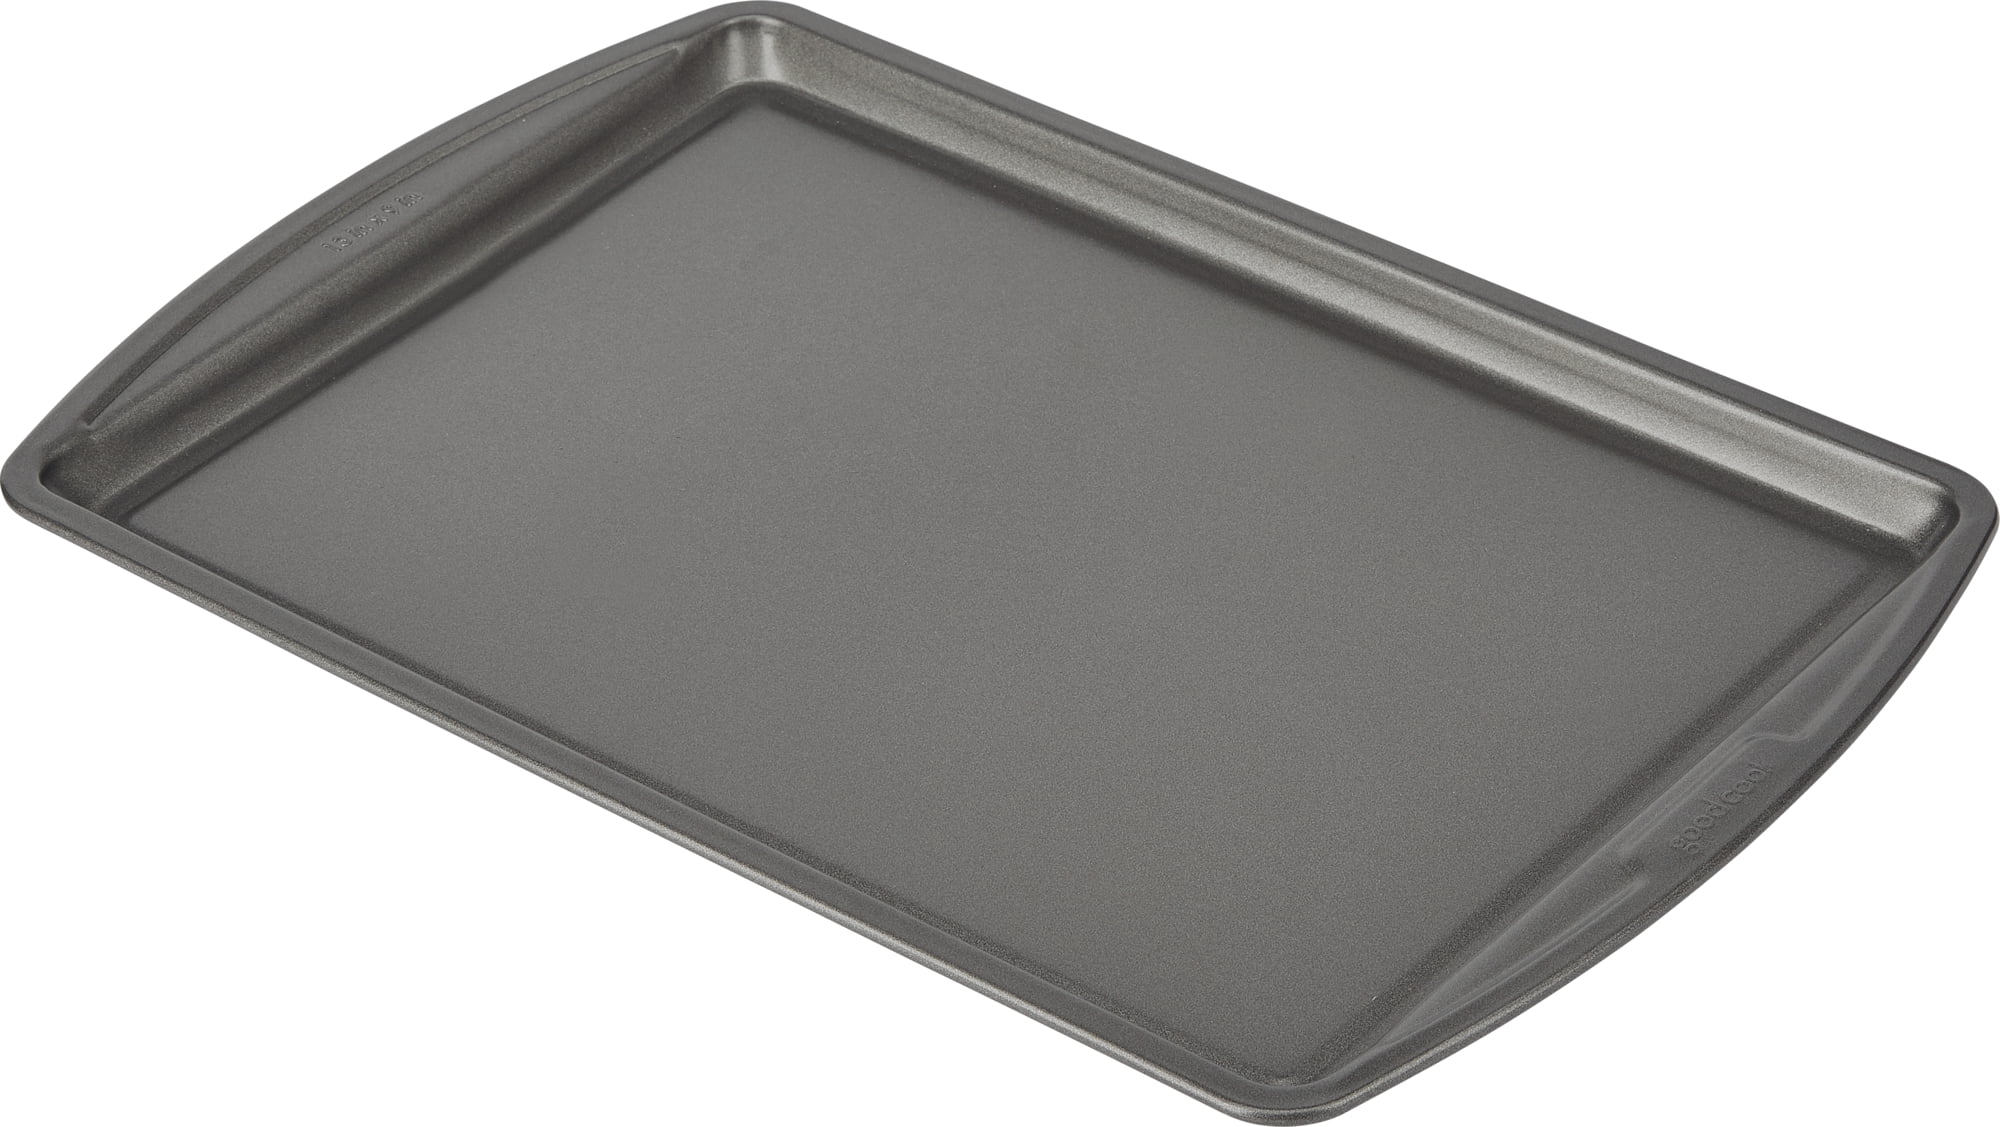 AirBake Insulated Cookie Sheet Advertising Mini Poster & Instructions